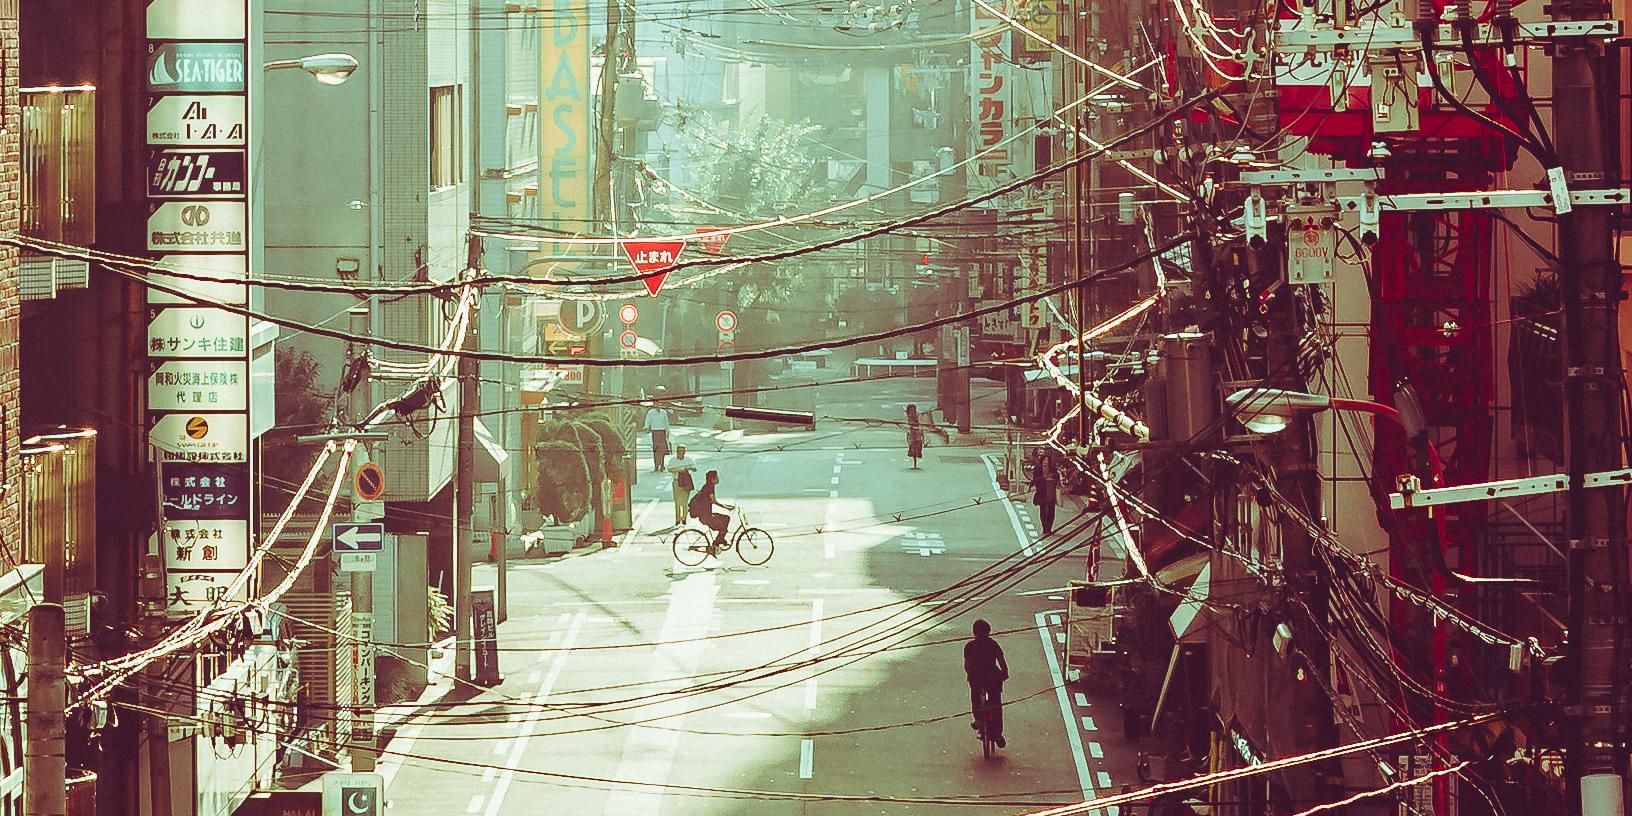 A photo taken down a street from second story vantage point, in Osaka, Japan. Buildings line the street, and power lines cross from one side to the other. Only cyclists and pedestrians can be seen on the street.